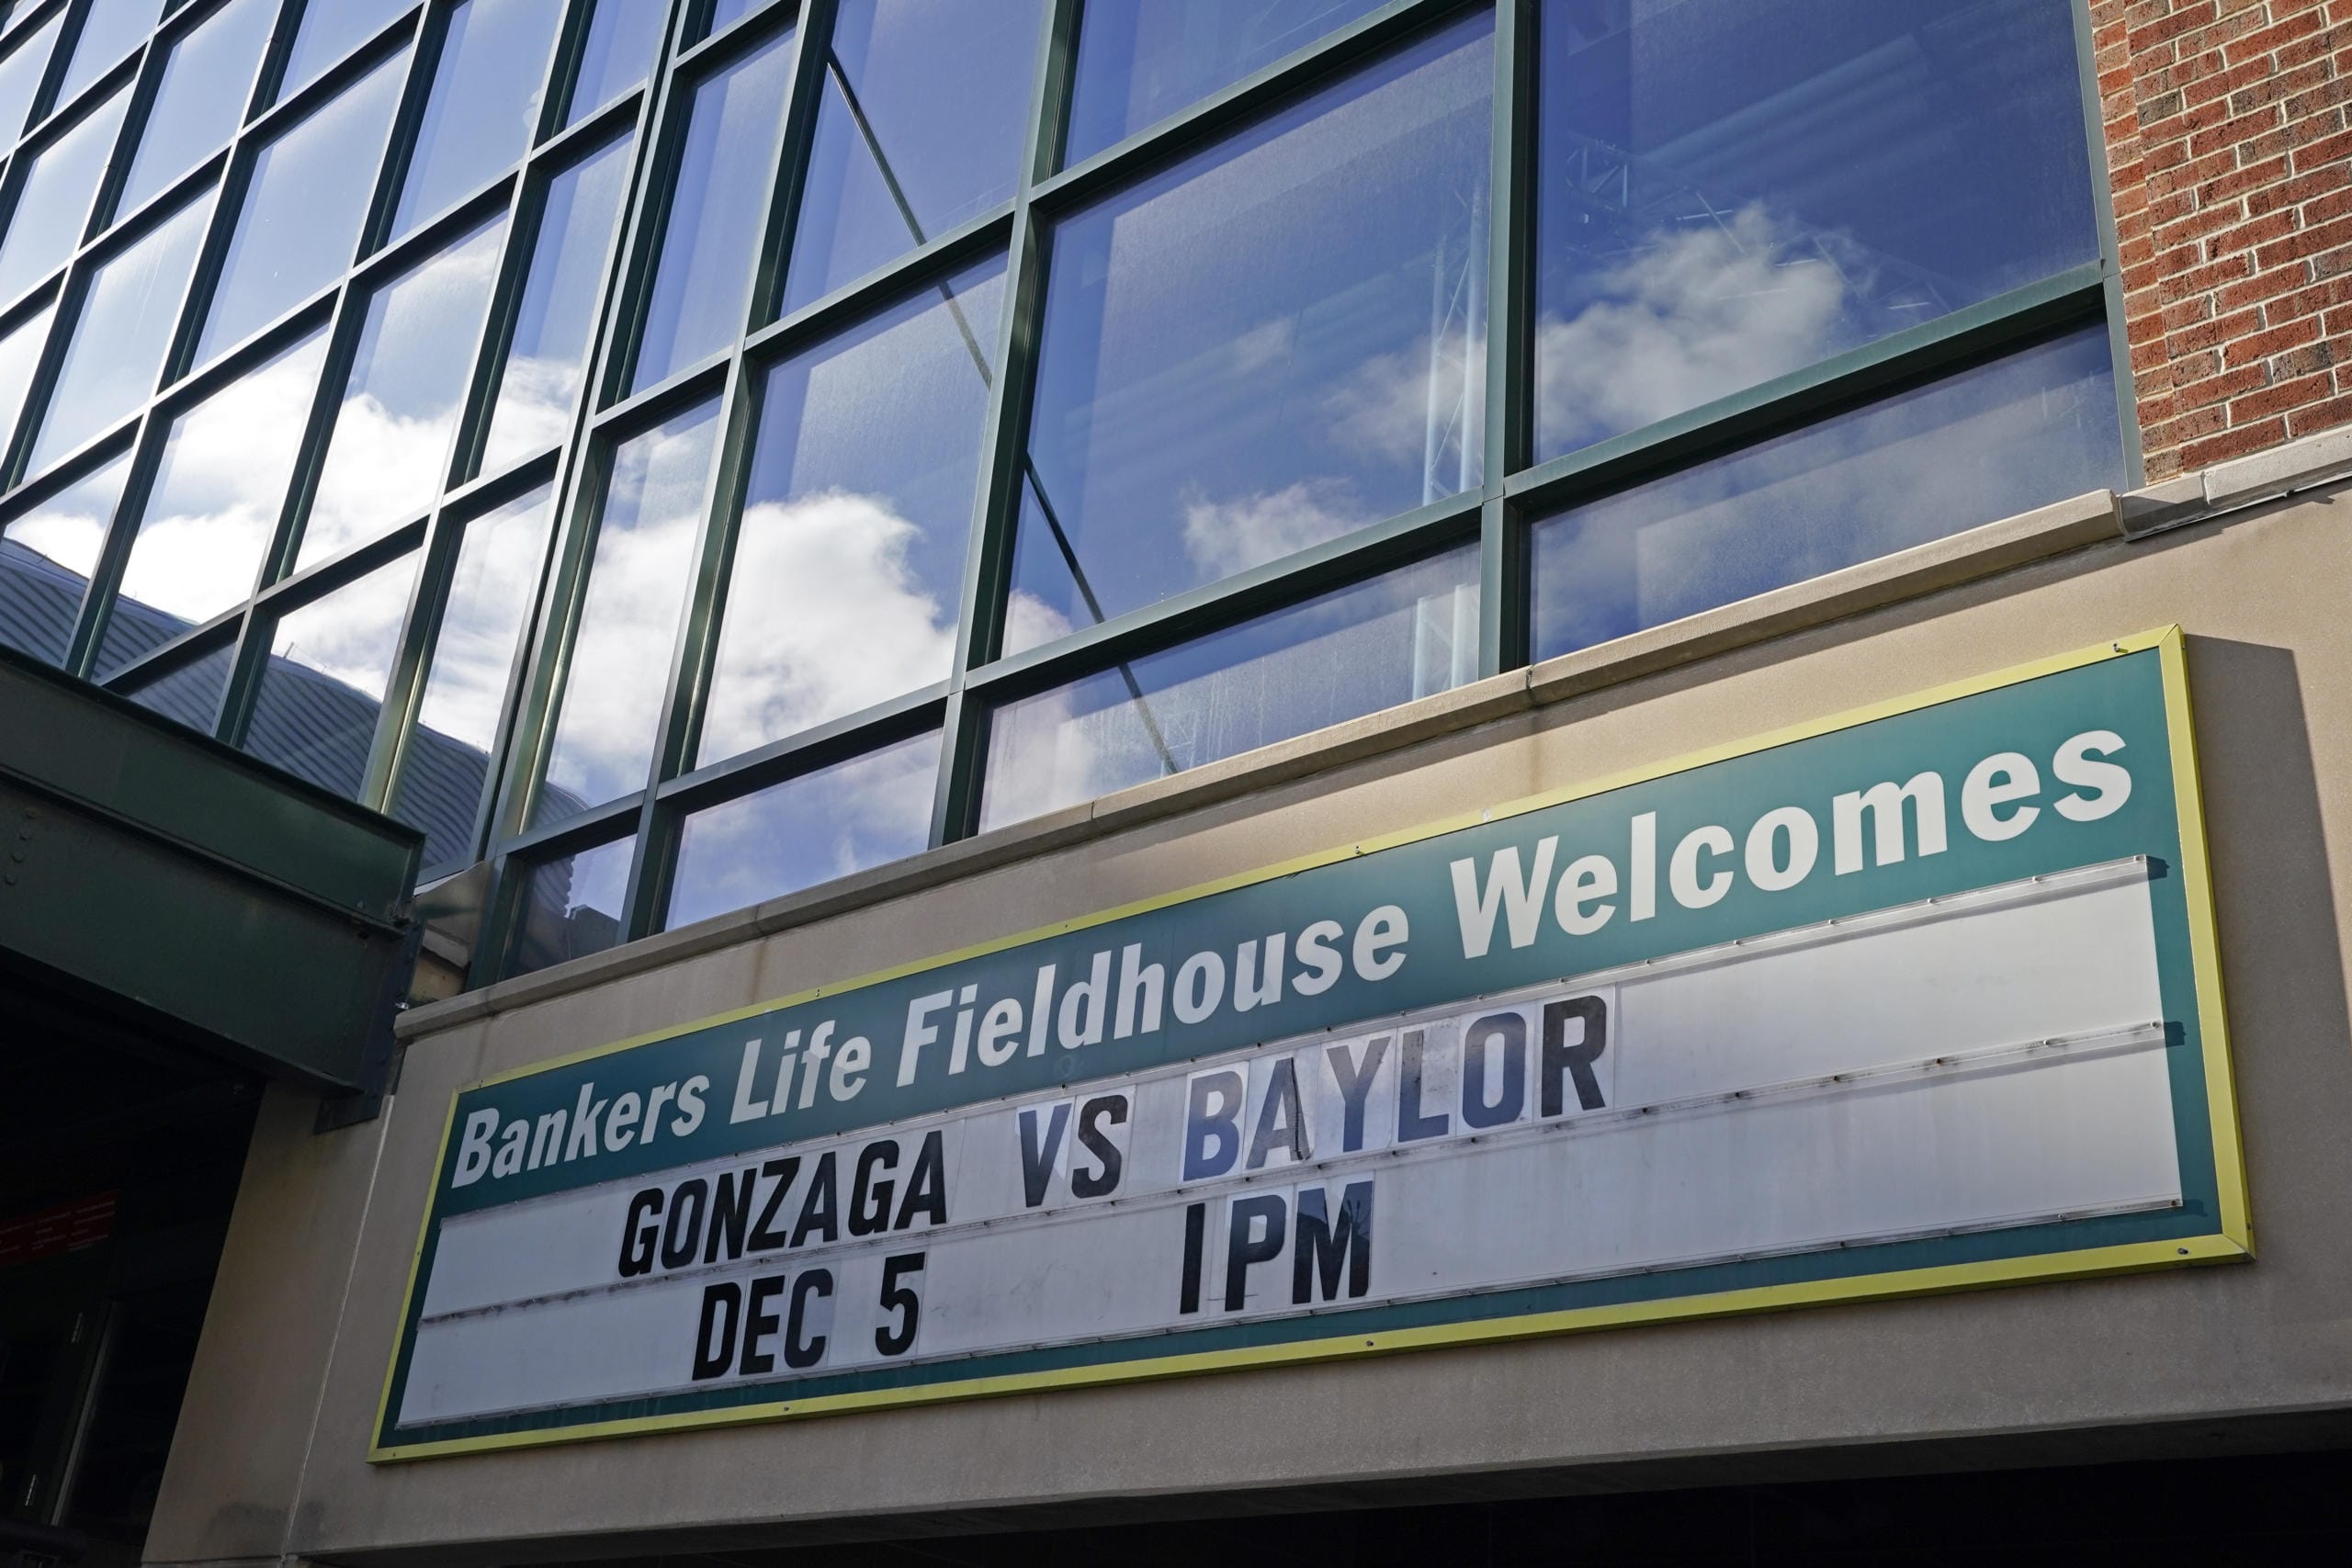 A sign outside of Bankers Life Fieldhouse shows the display for the Gonzaga vs. Baylor basketball game that was scheduled to play in an NCAA college basketball game, Saturday, Dec. 5, 2020, in Indianapolis. The game was canceled due to COVID.